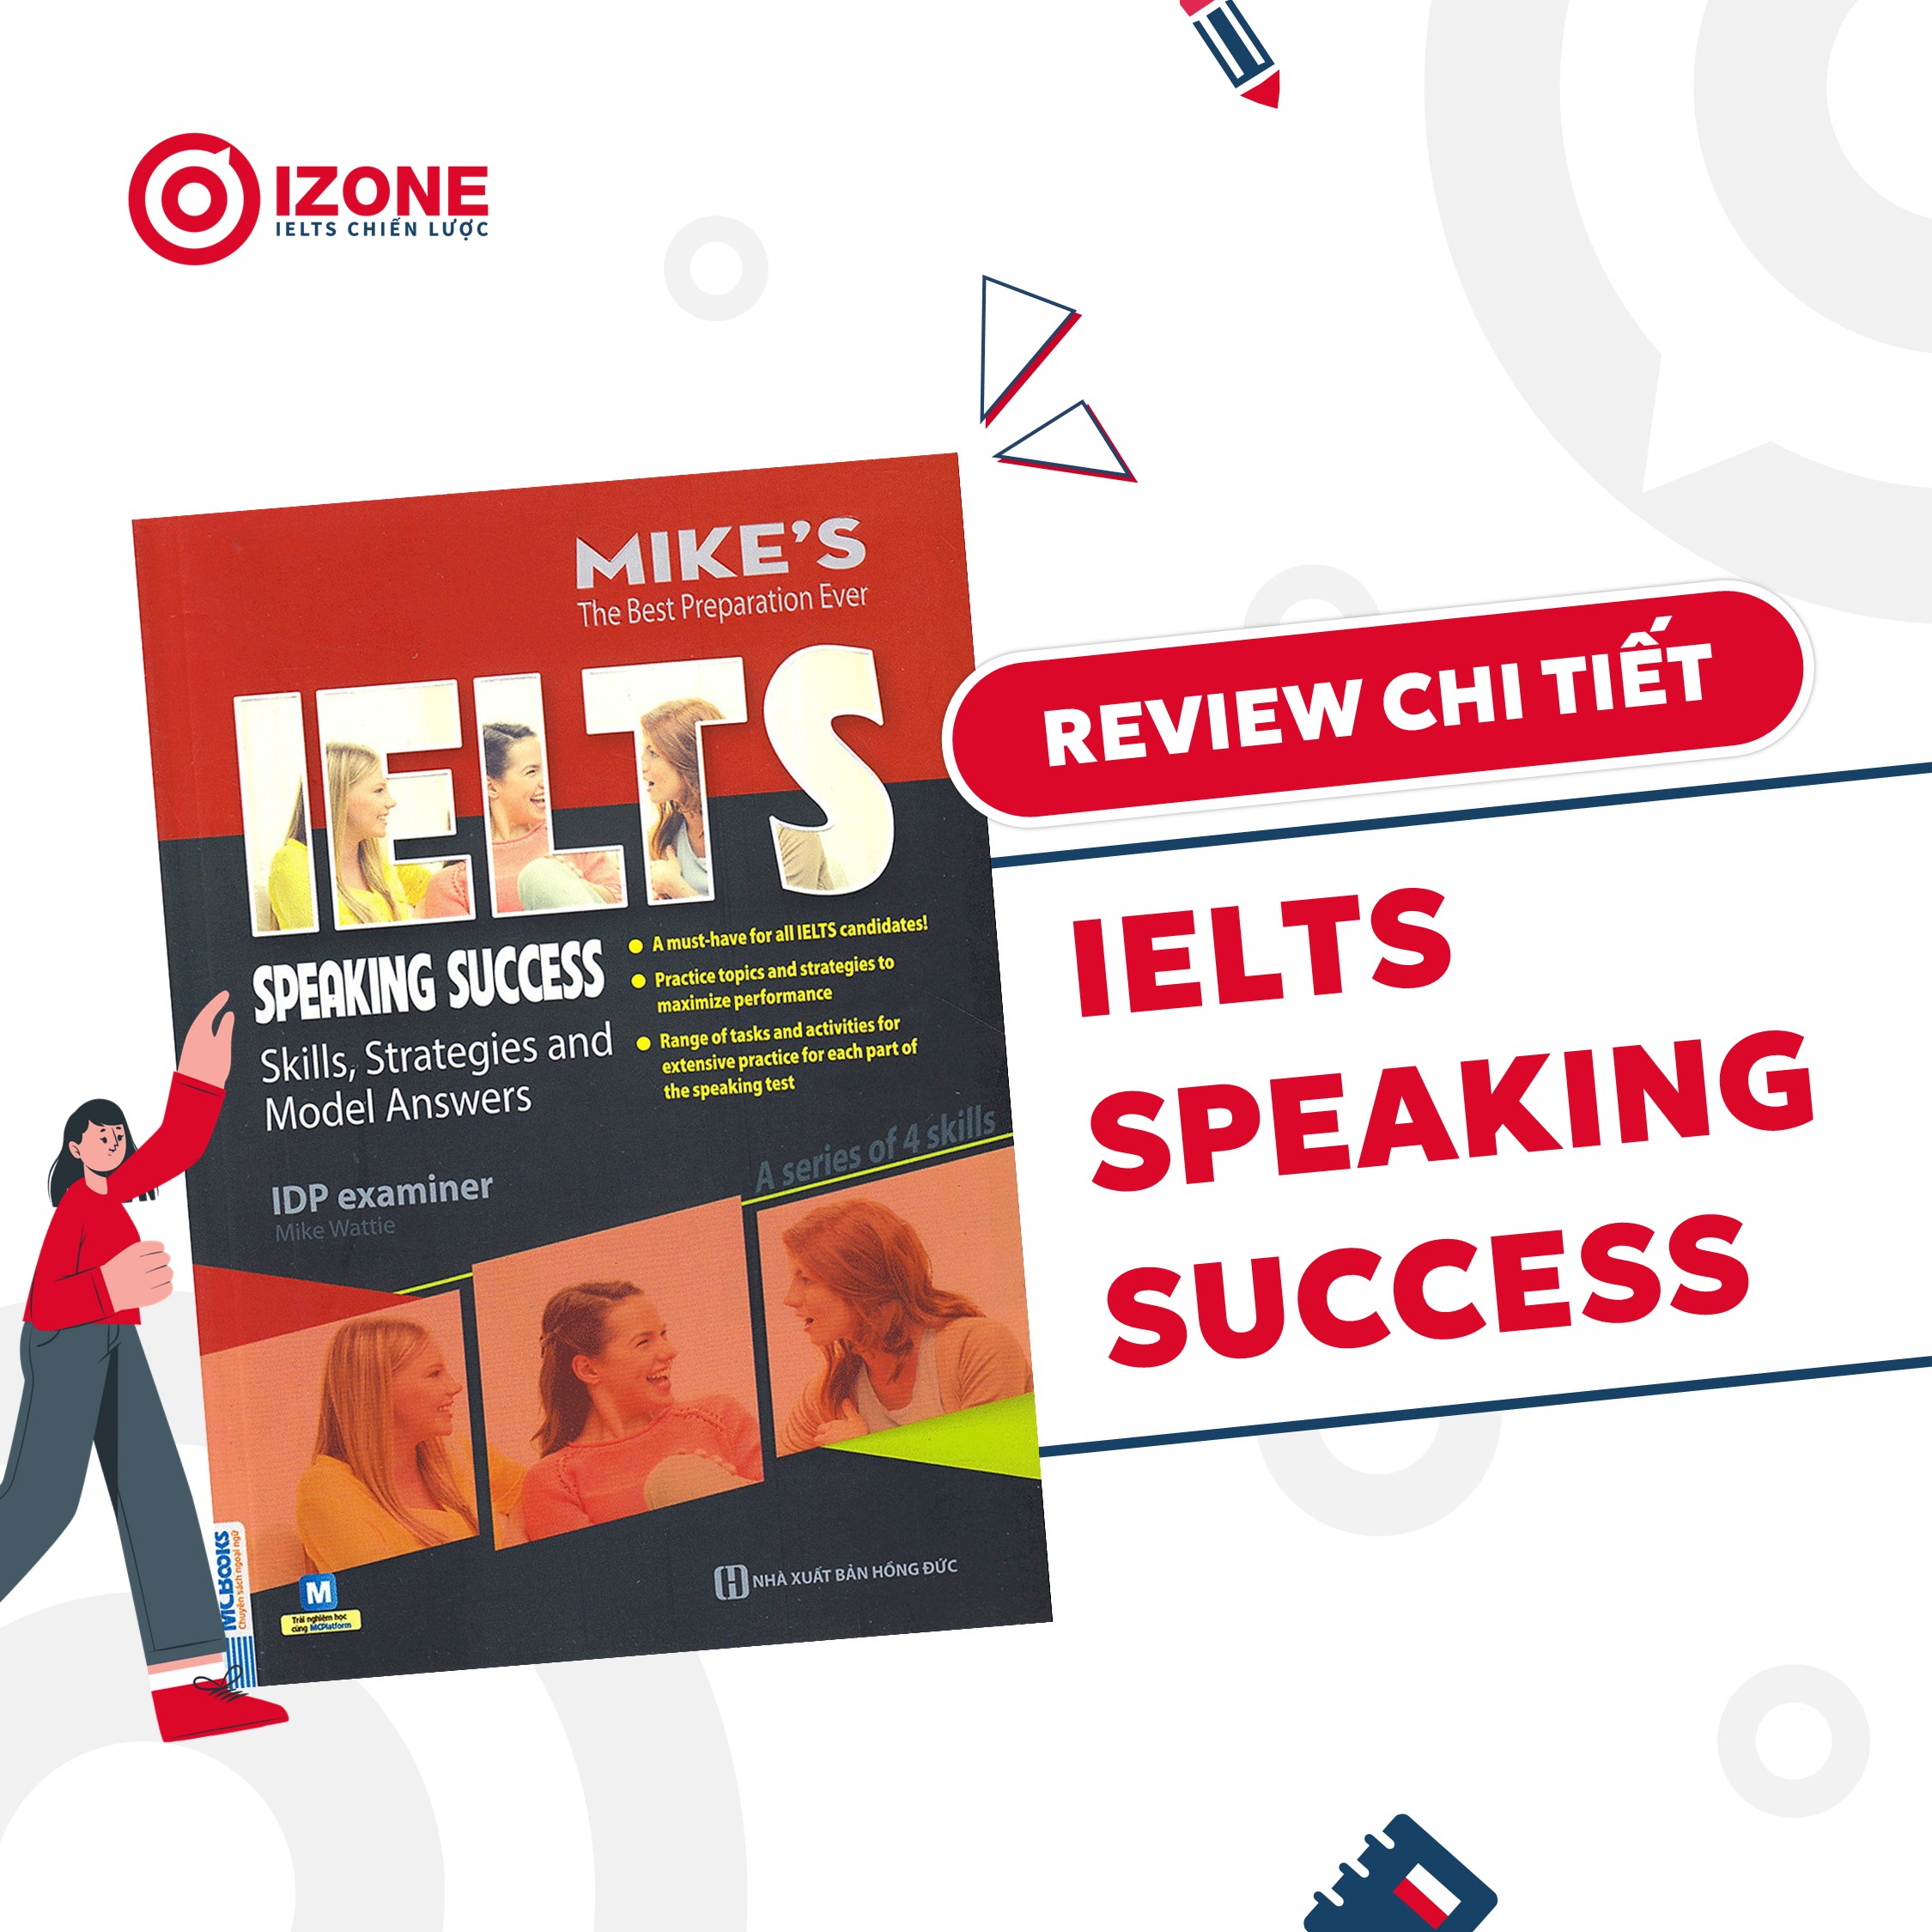 Review chi tiết về cuốn sách IELTS Speaking Success